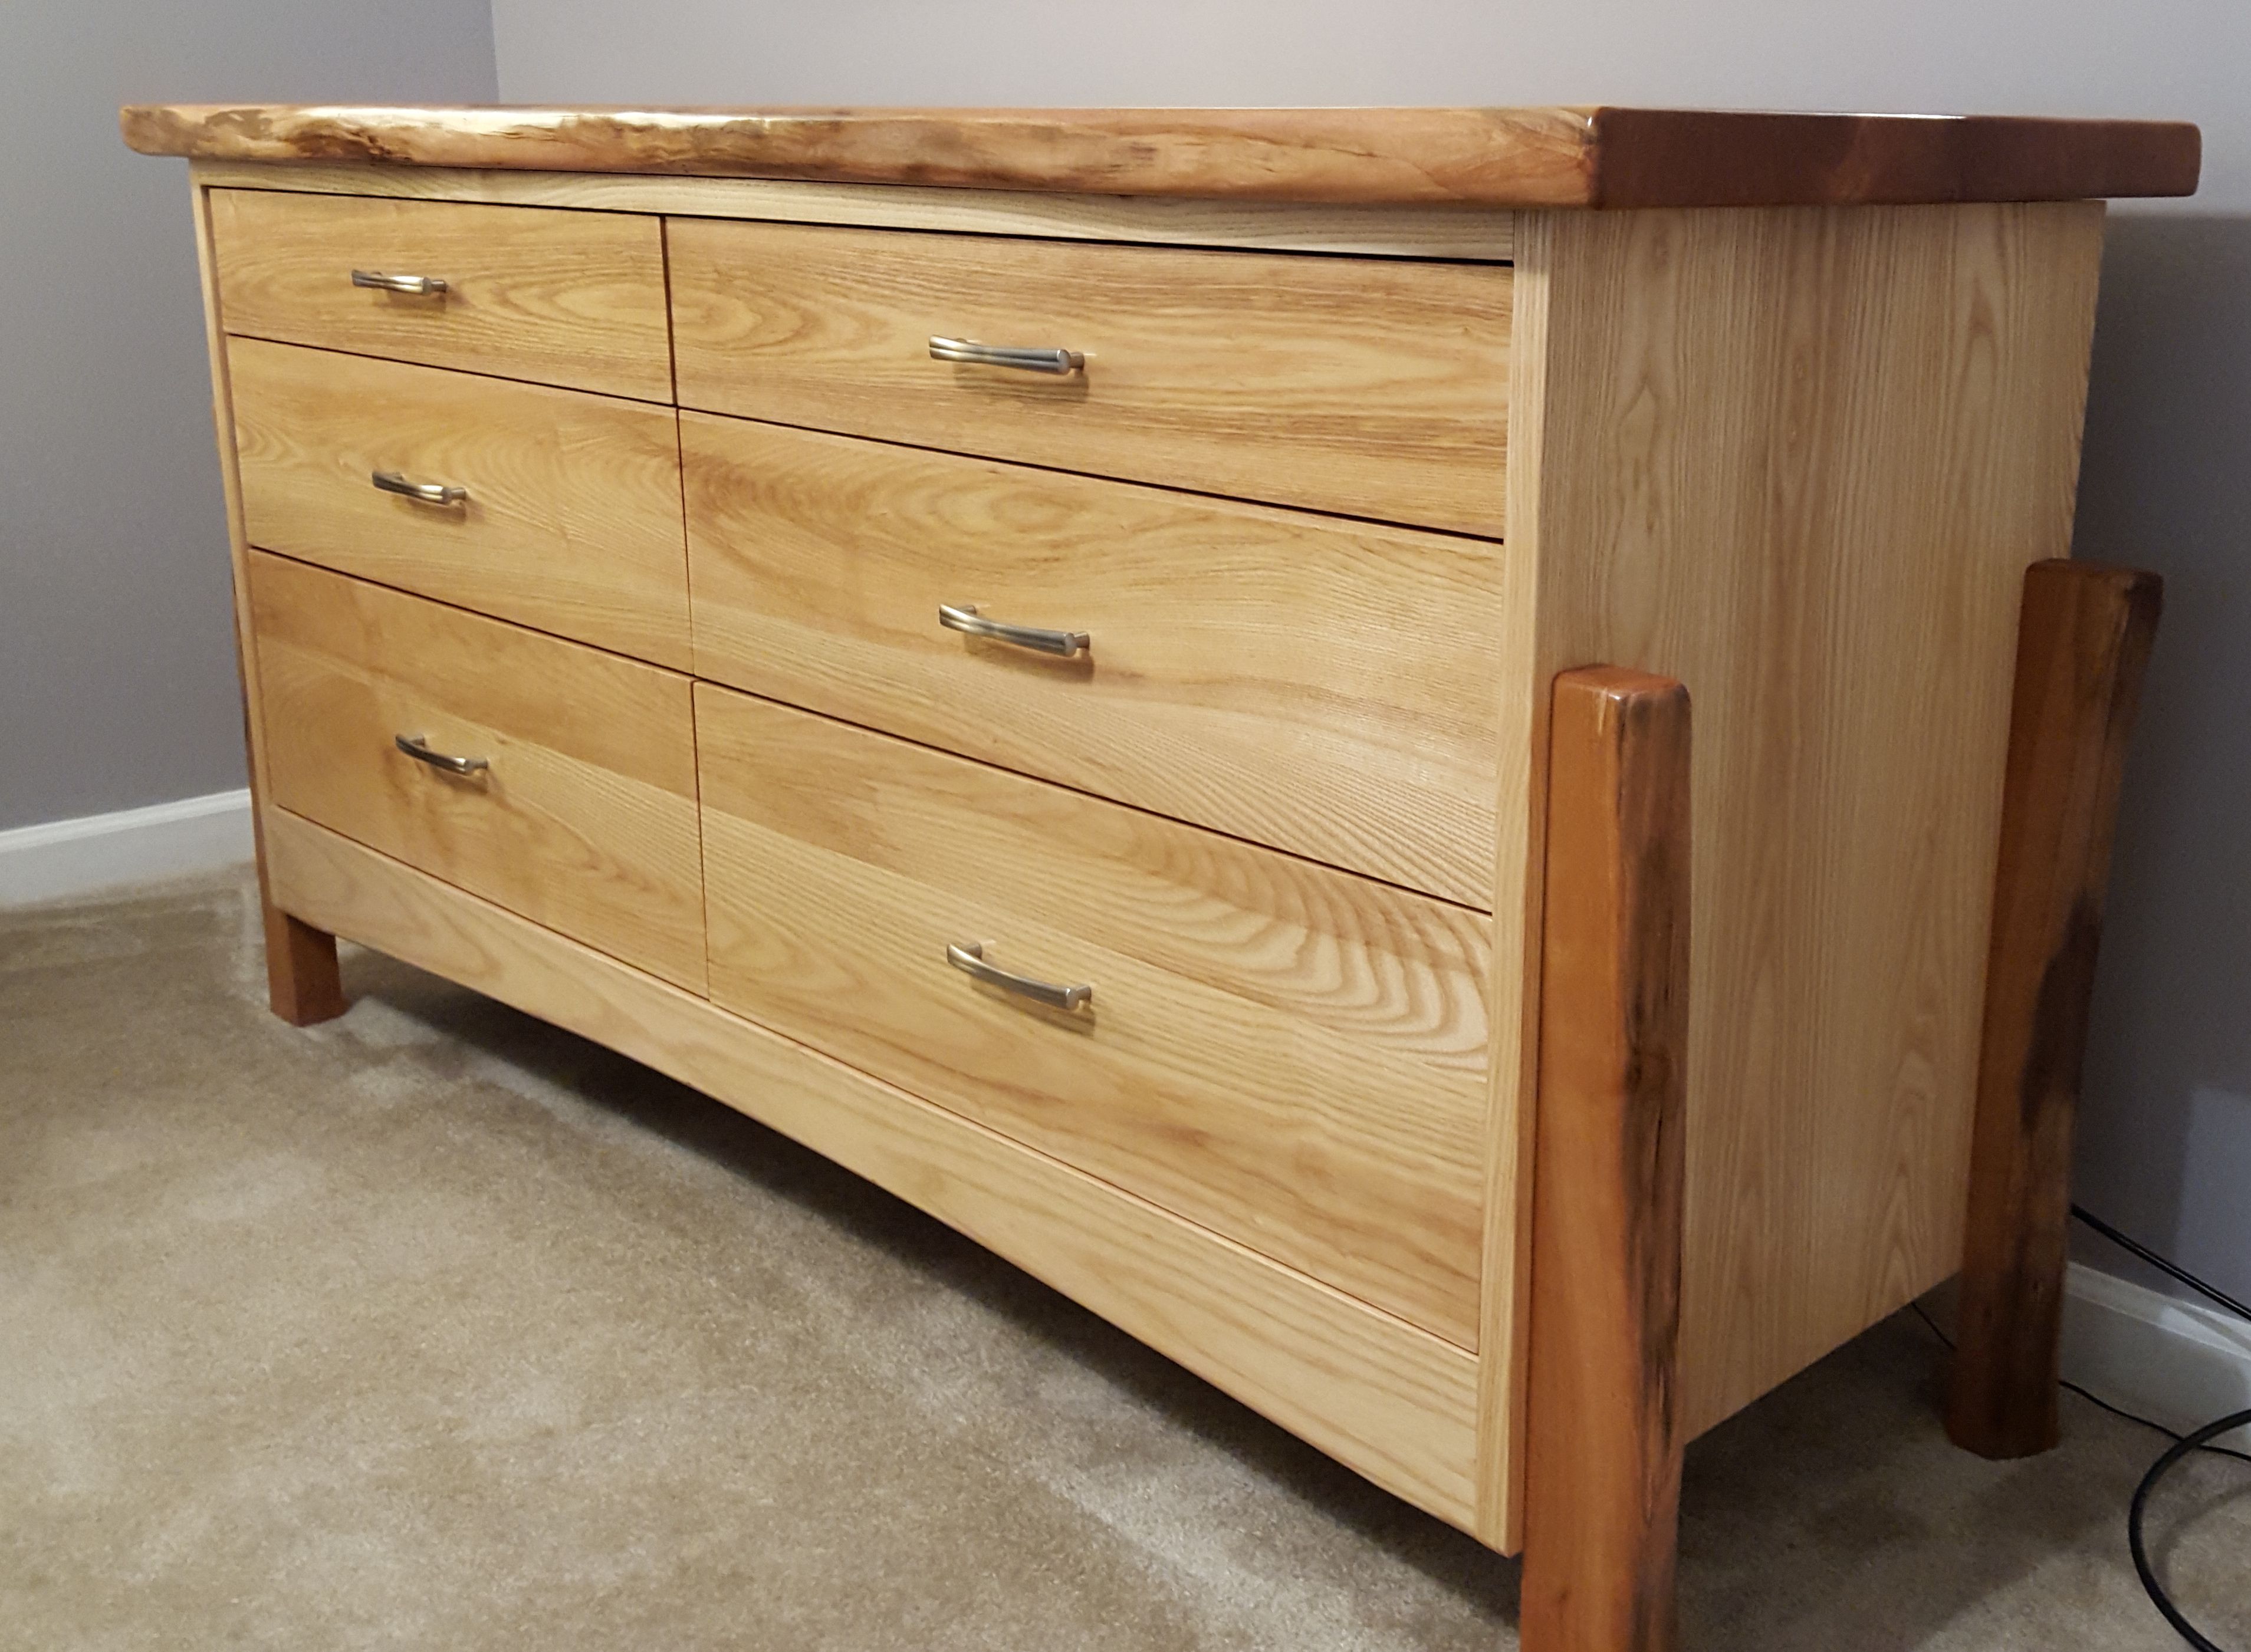 Custom Six Drawer Dresser With Cherry Live Edge Top by Lehigh Valley